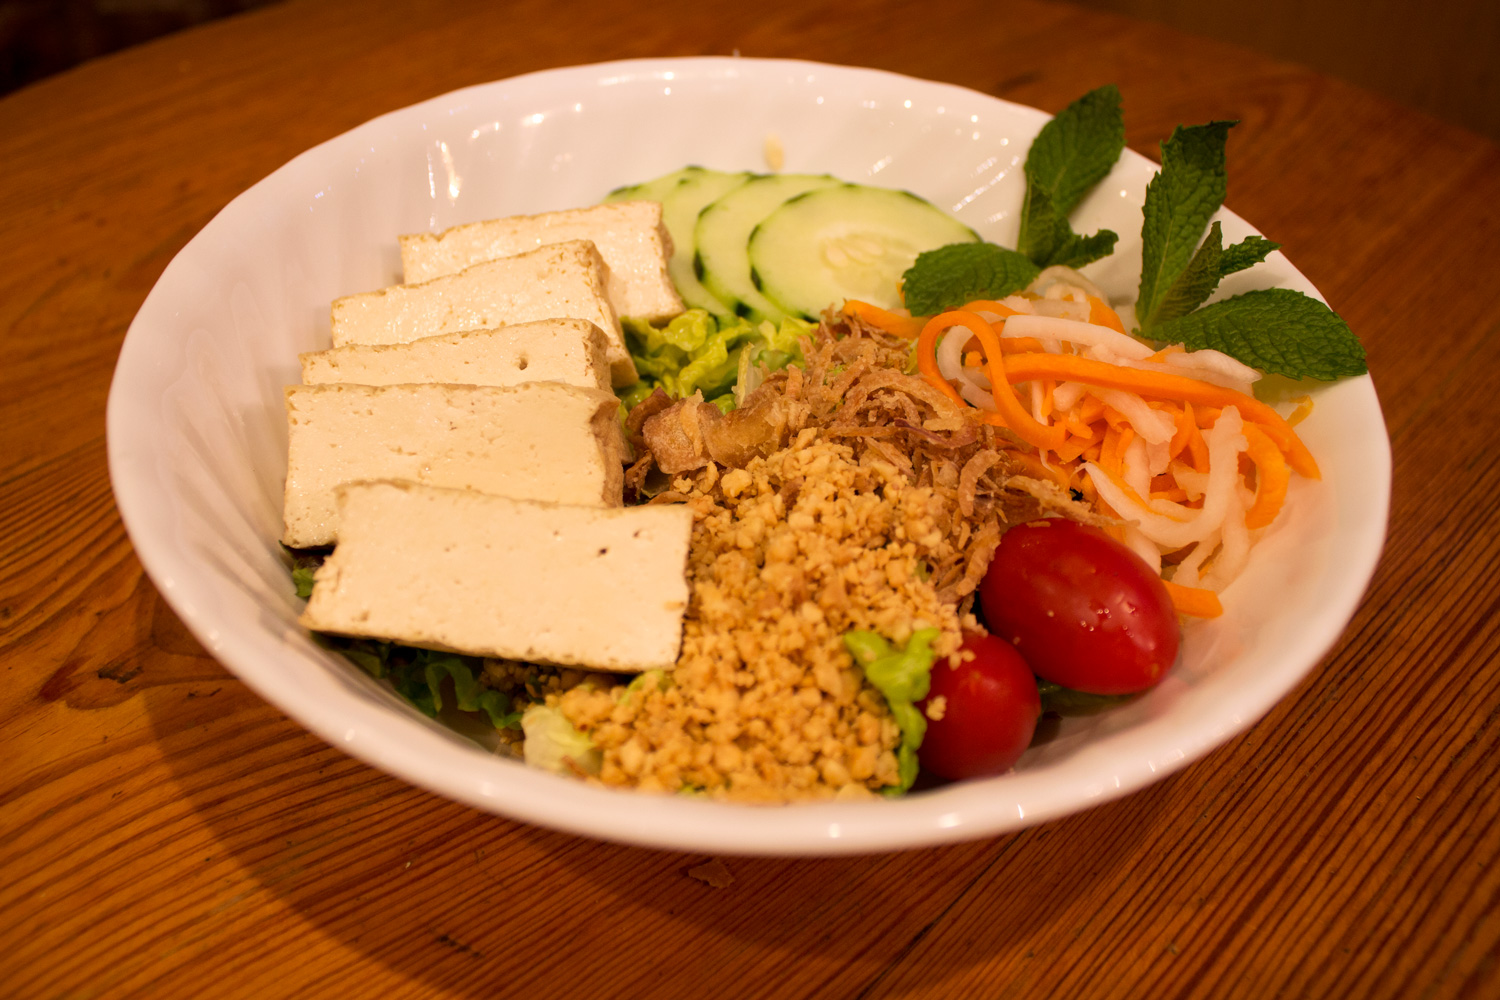 Tofu green salad topped with variety of greens and peanuts